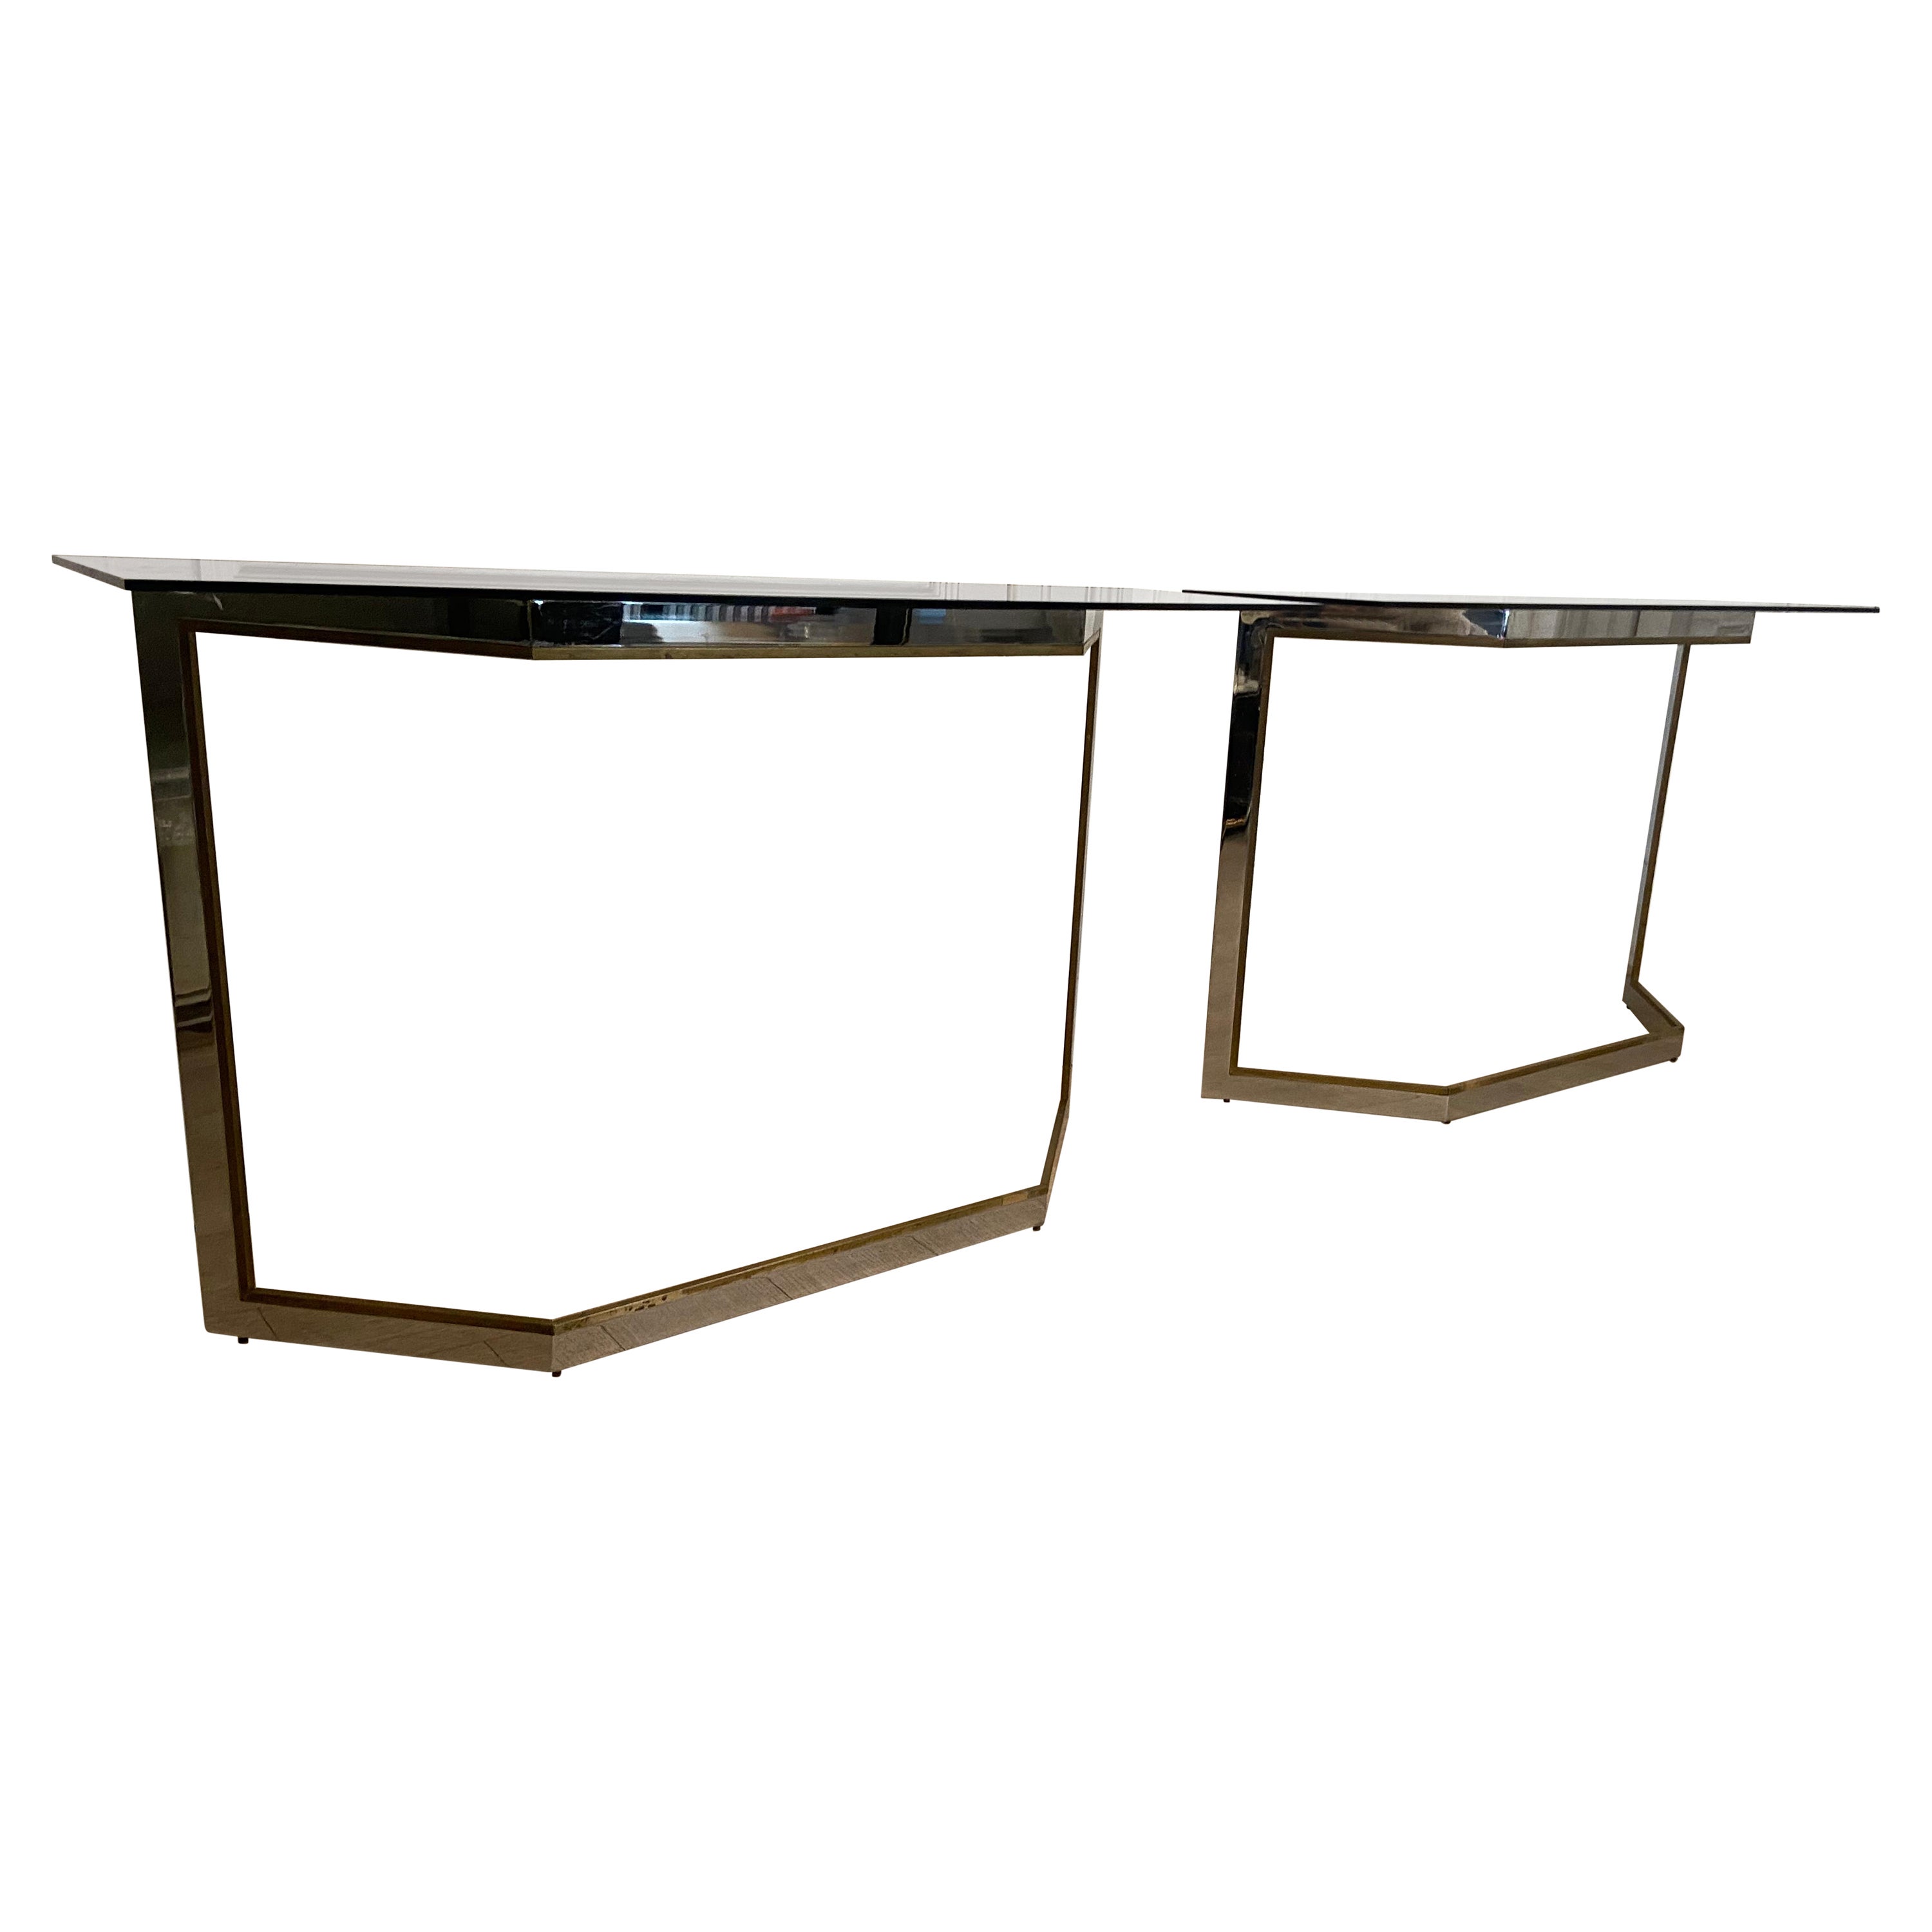 Elegant Pair of Italian Consoles from the 70s, Structure in Chromed Metal